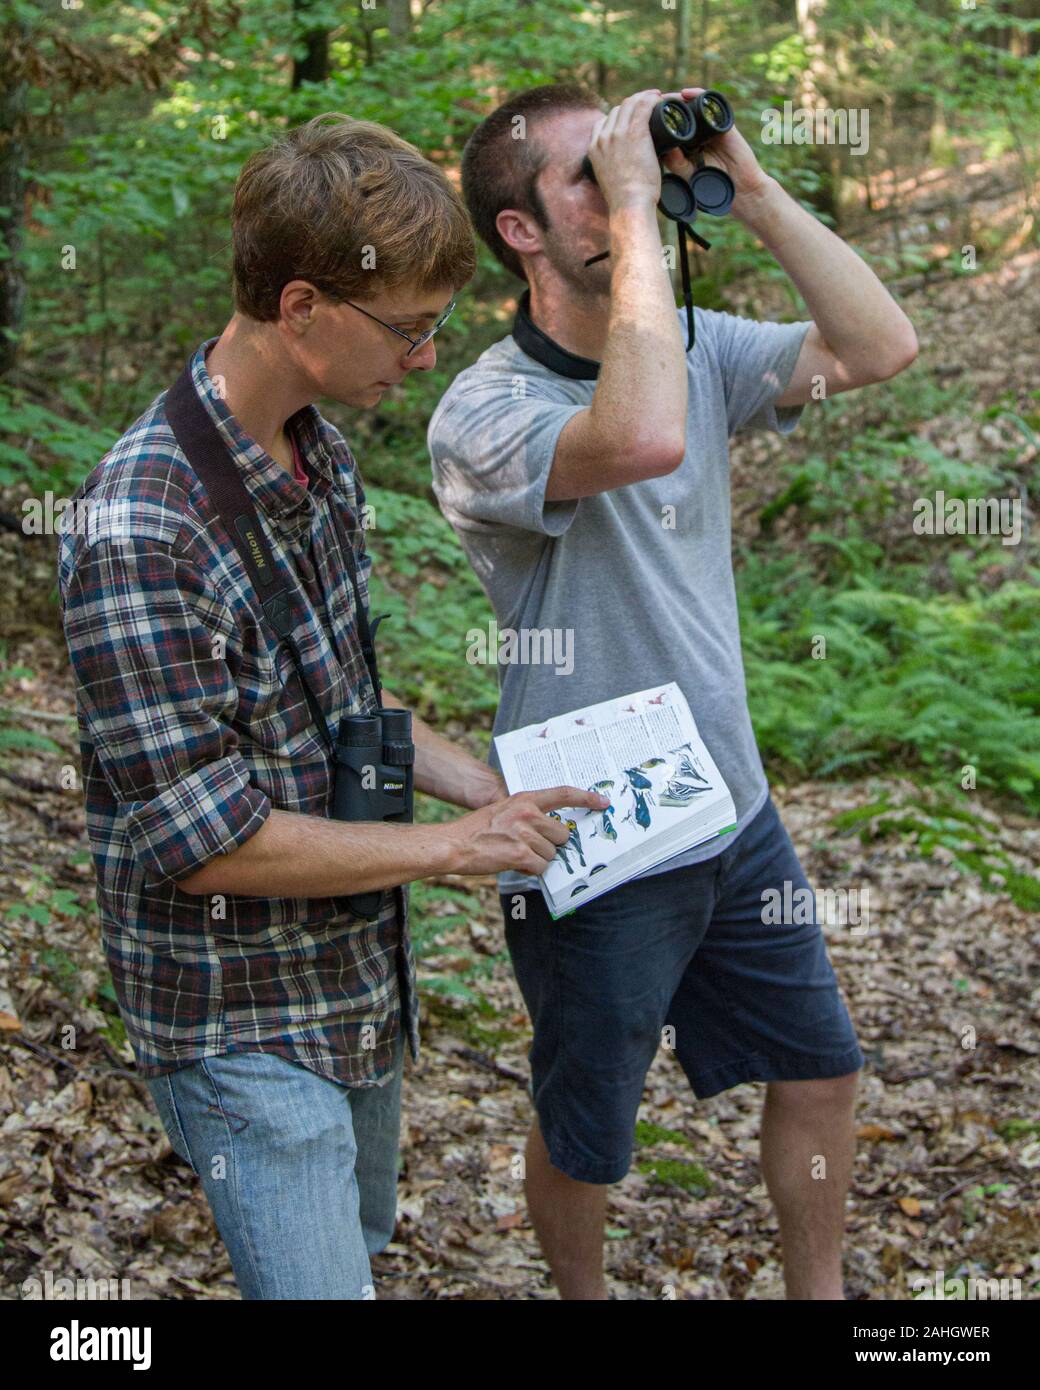 Two young men birdwatching in the woods Stock Photo